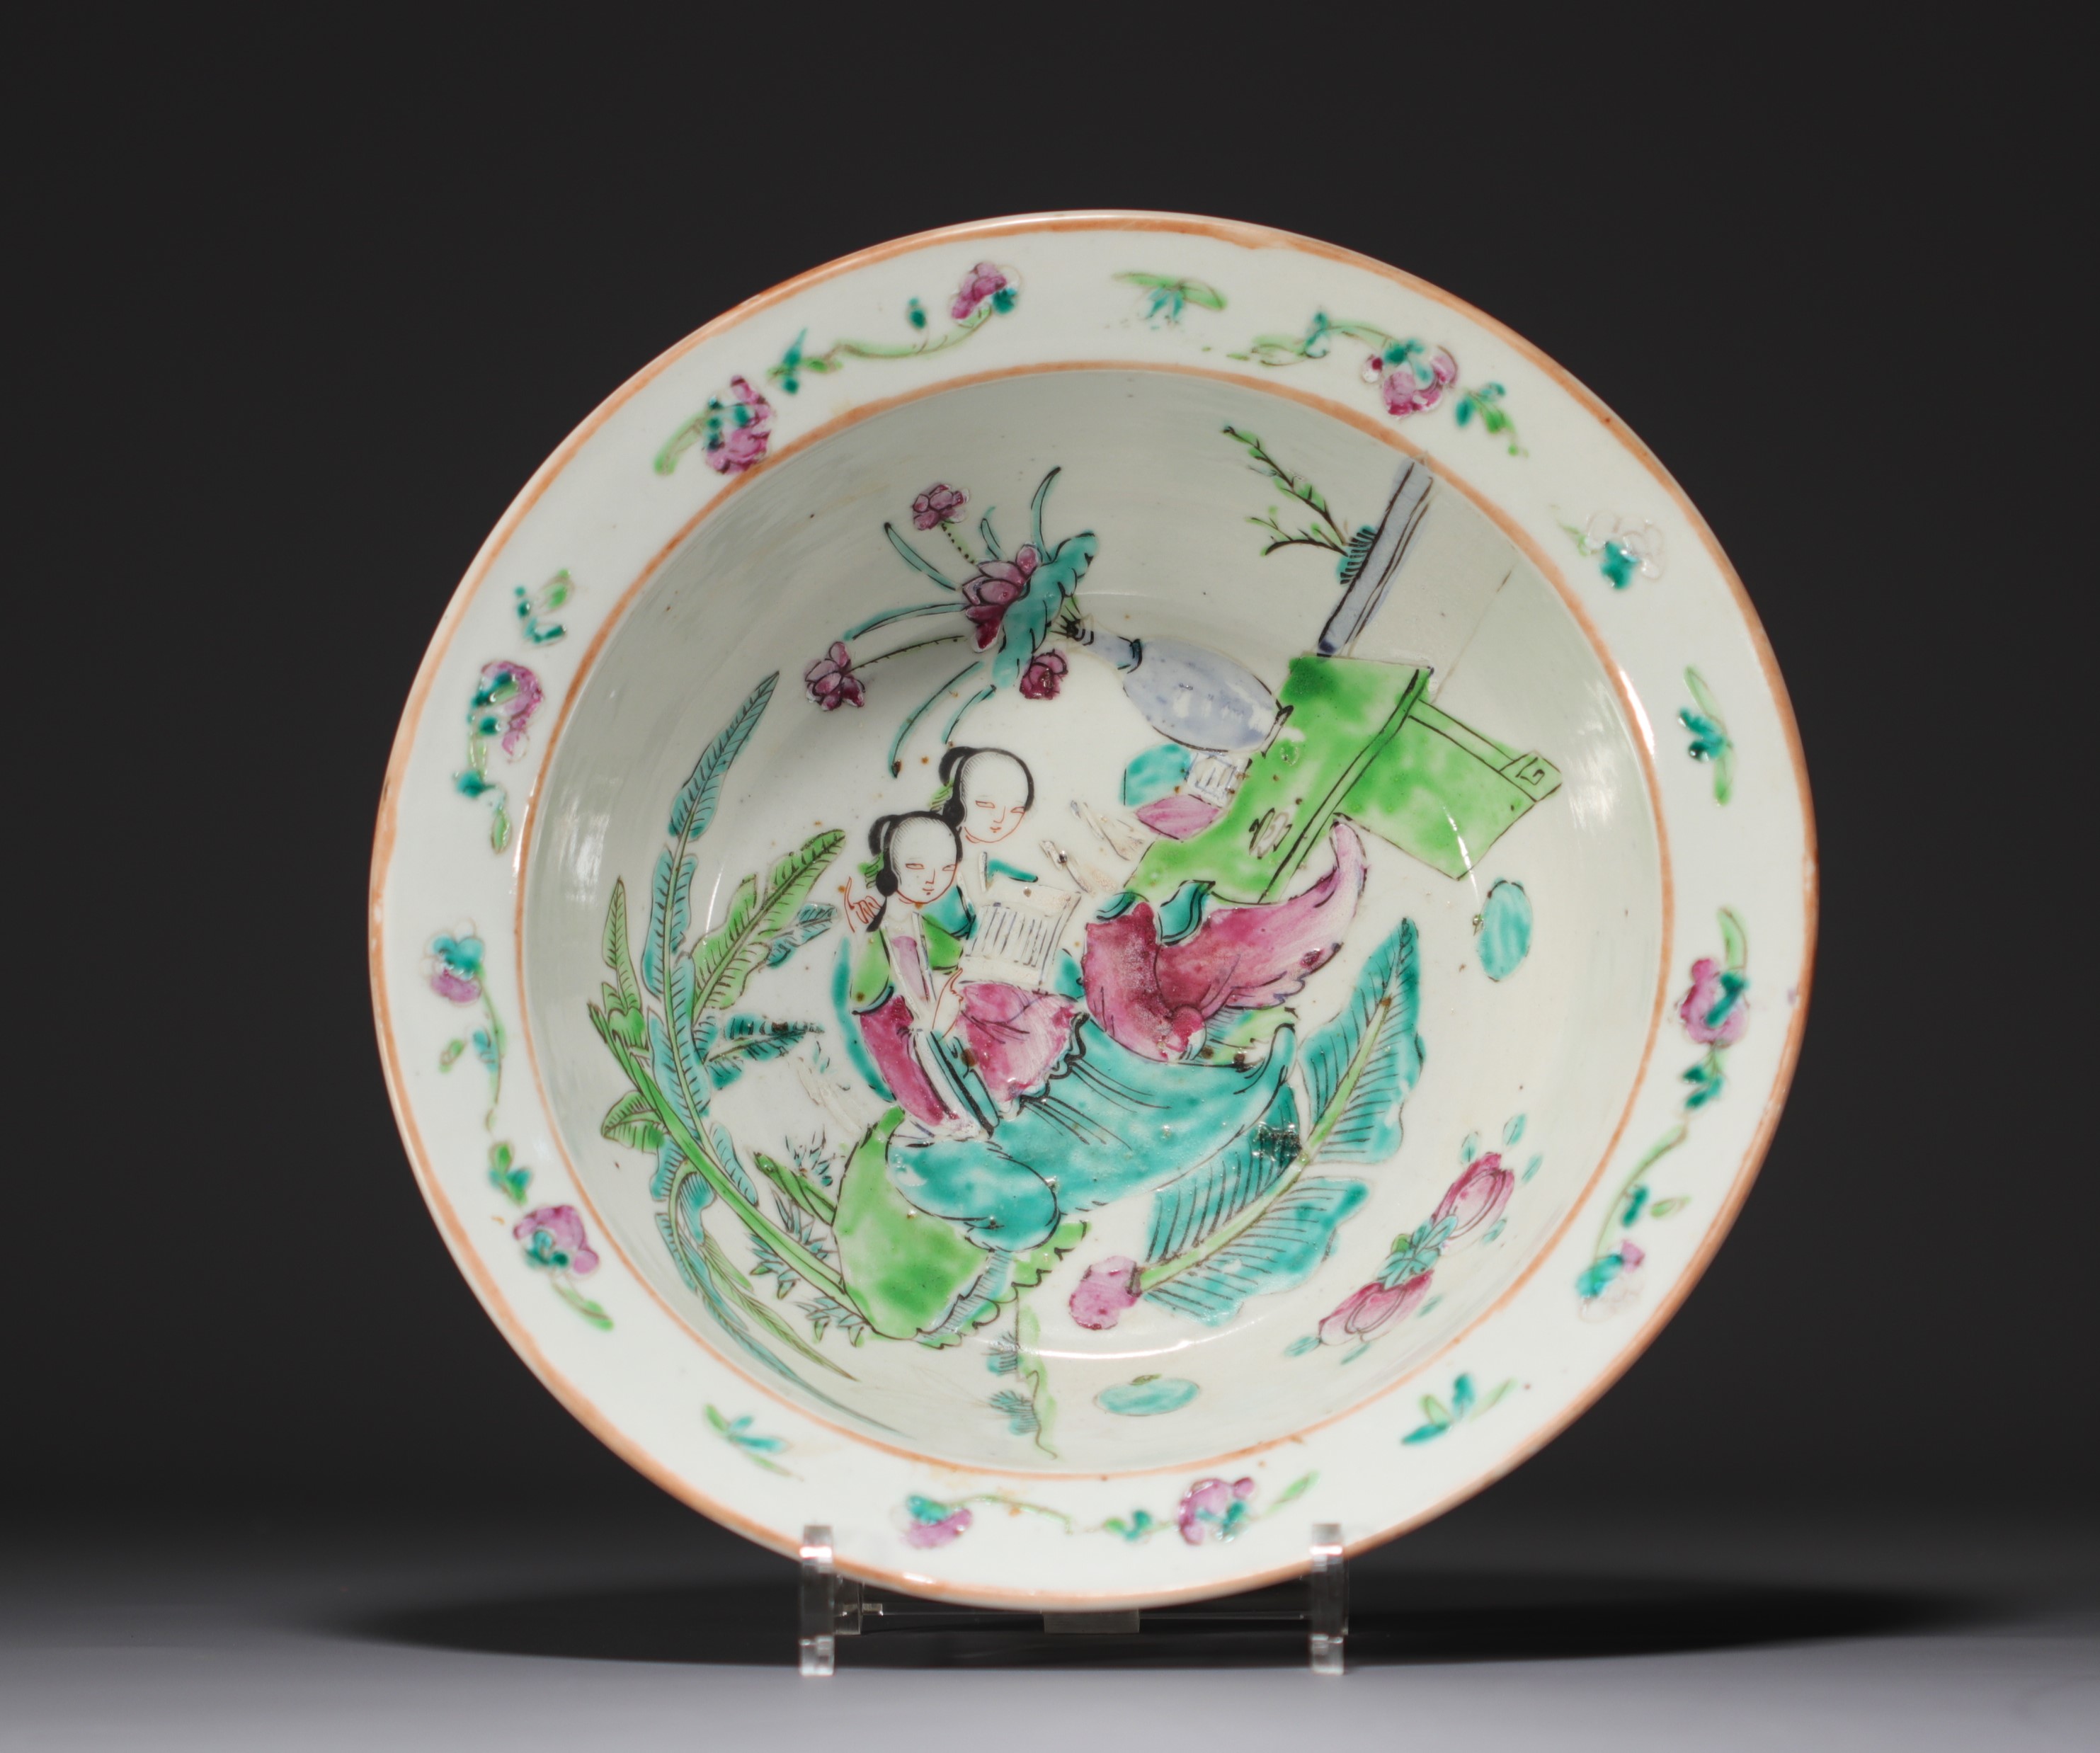 China - Pair of Famille Rose porcelain dishes decorated with figures, flowers and bats. - Image 3 of 5